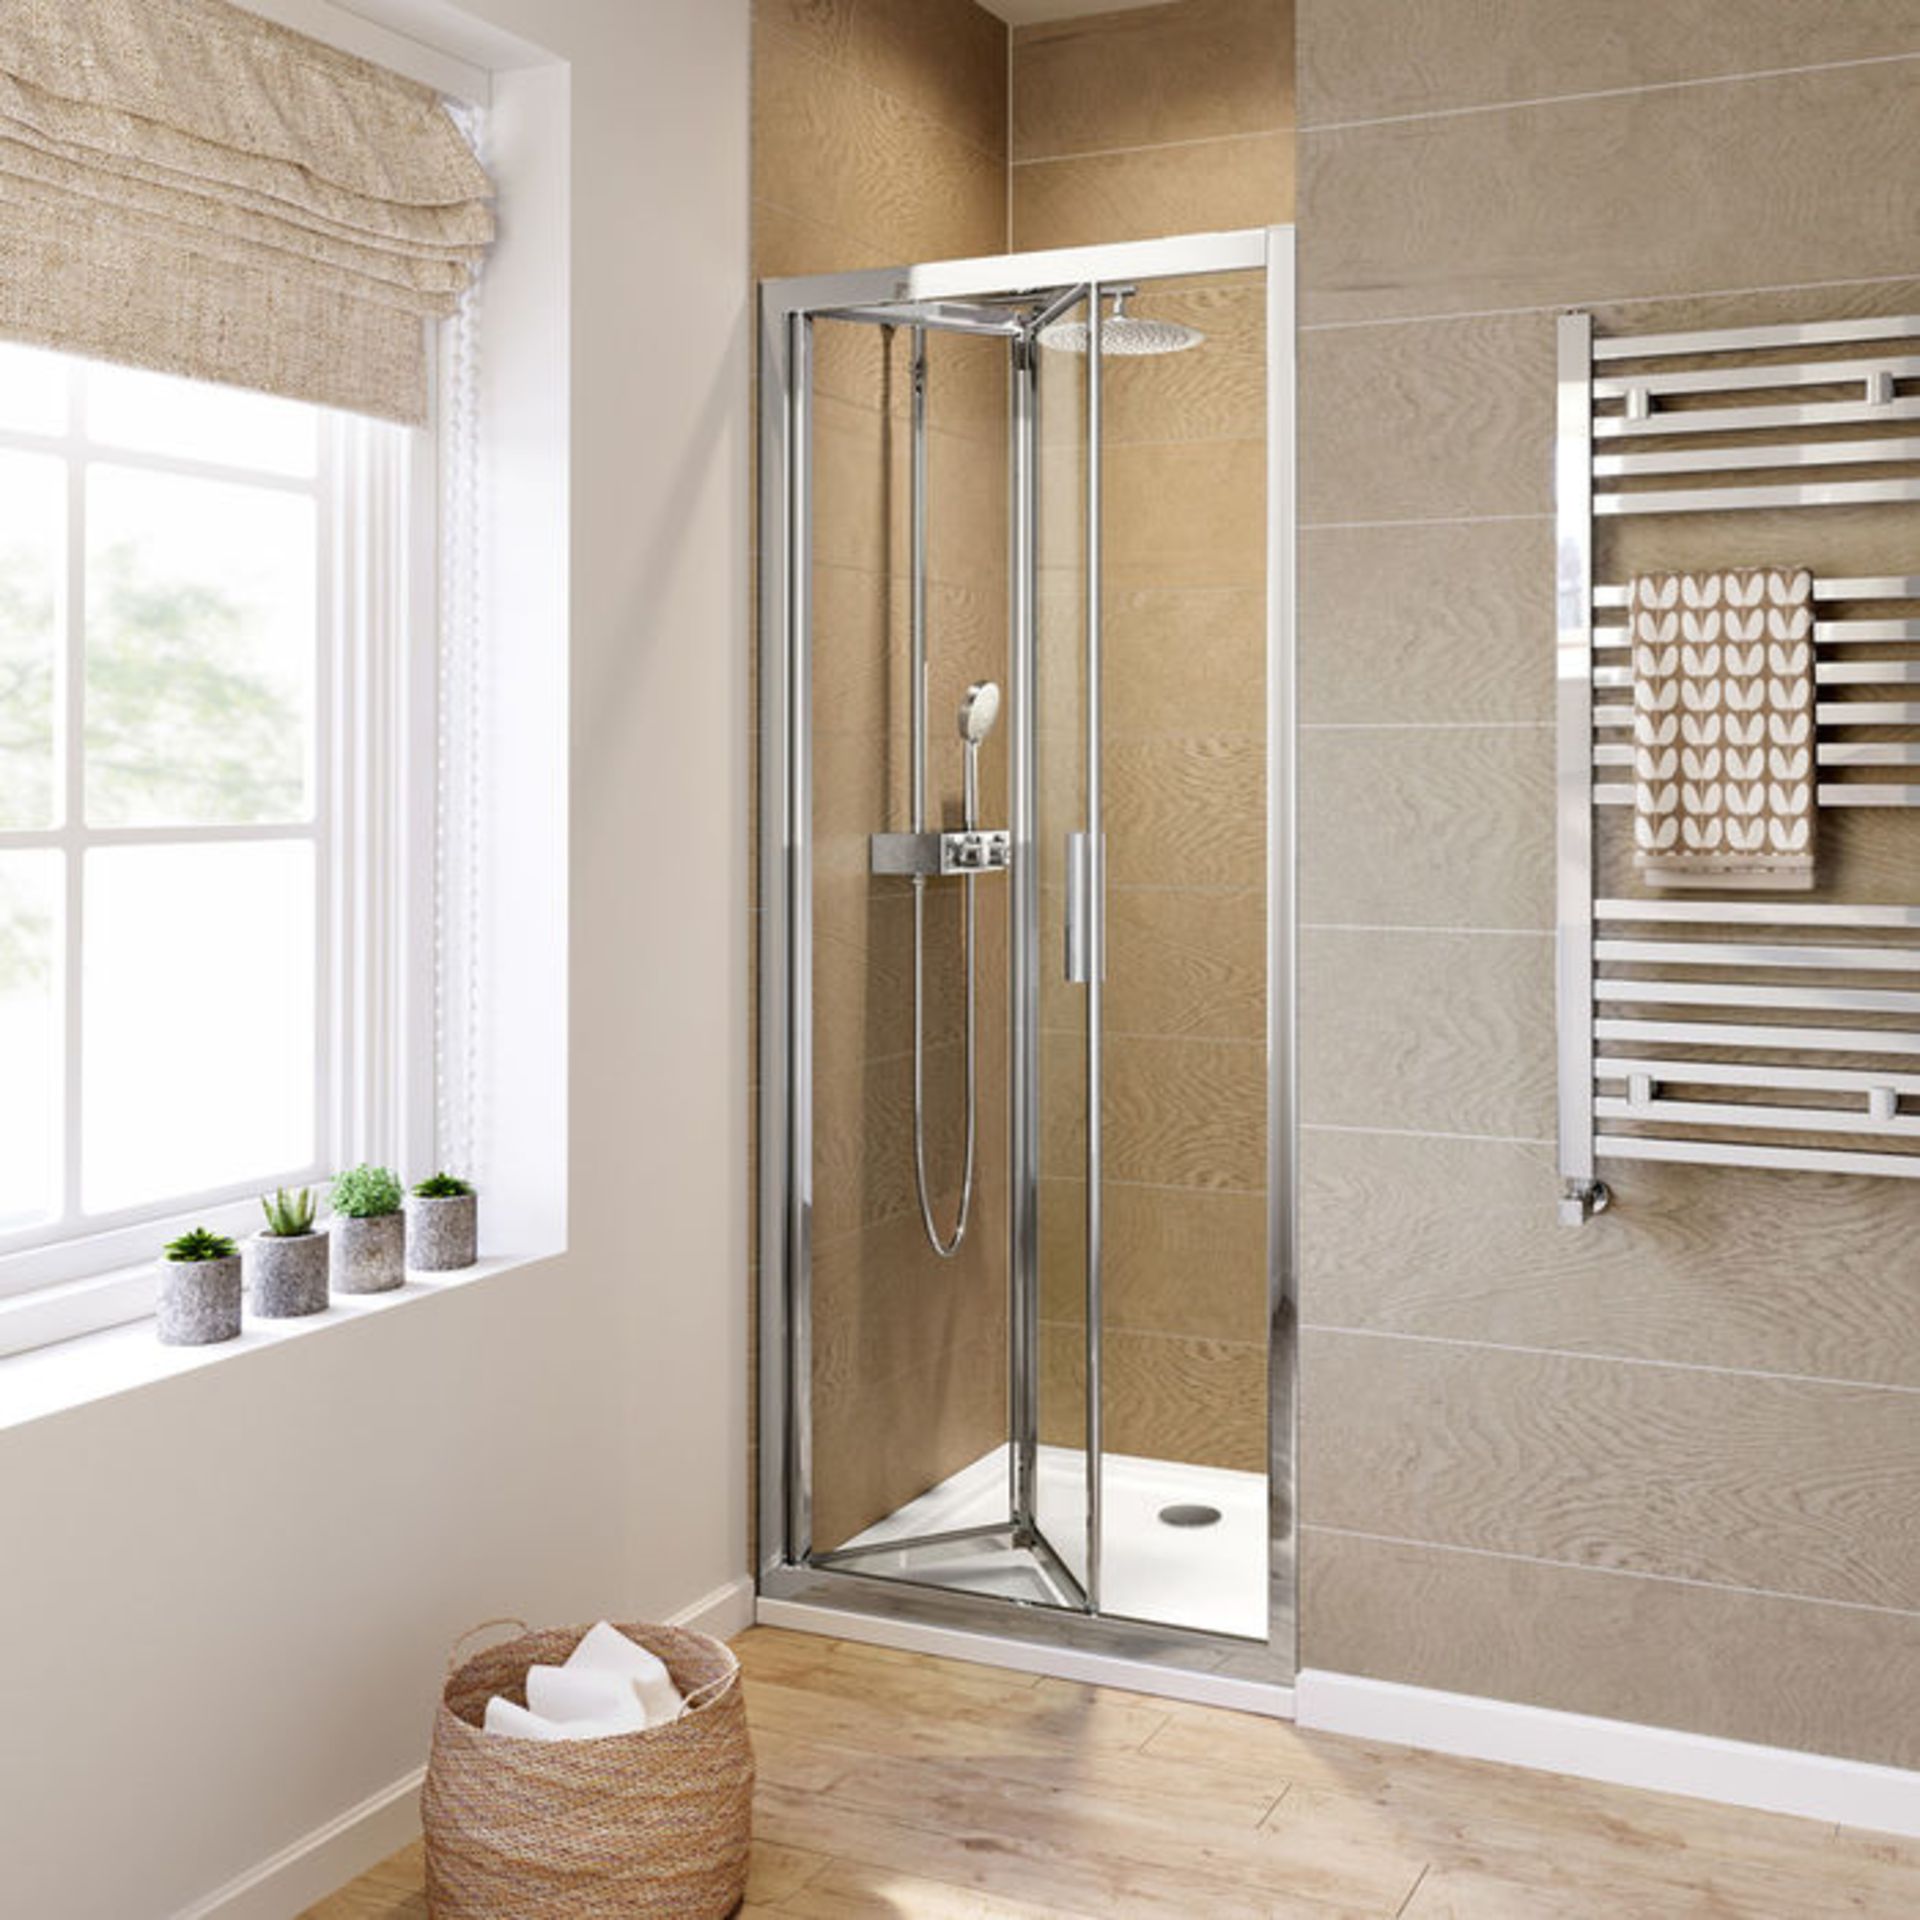 (DW210) 800mm - 6mm - Elements EasyClean Bifold Shower Door. RRP £299.99. 6mm Safety Glass - ... - Image 3 of 3